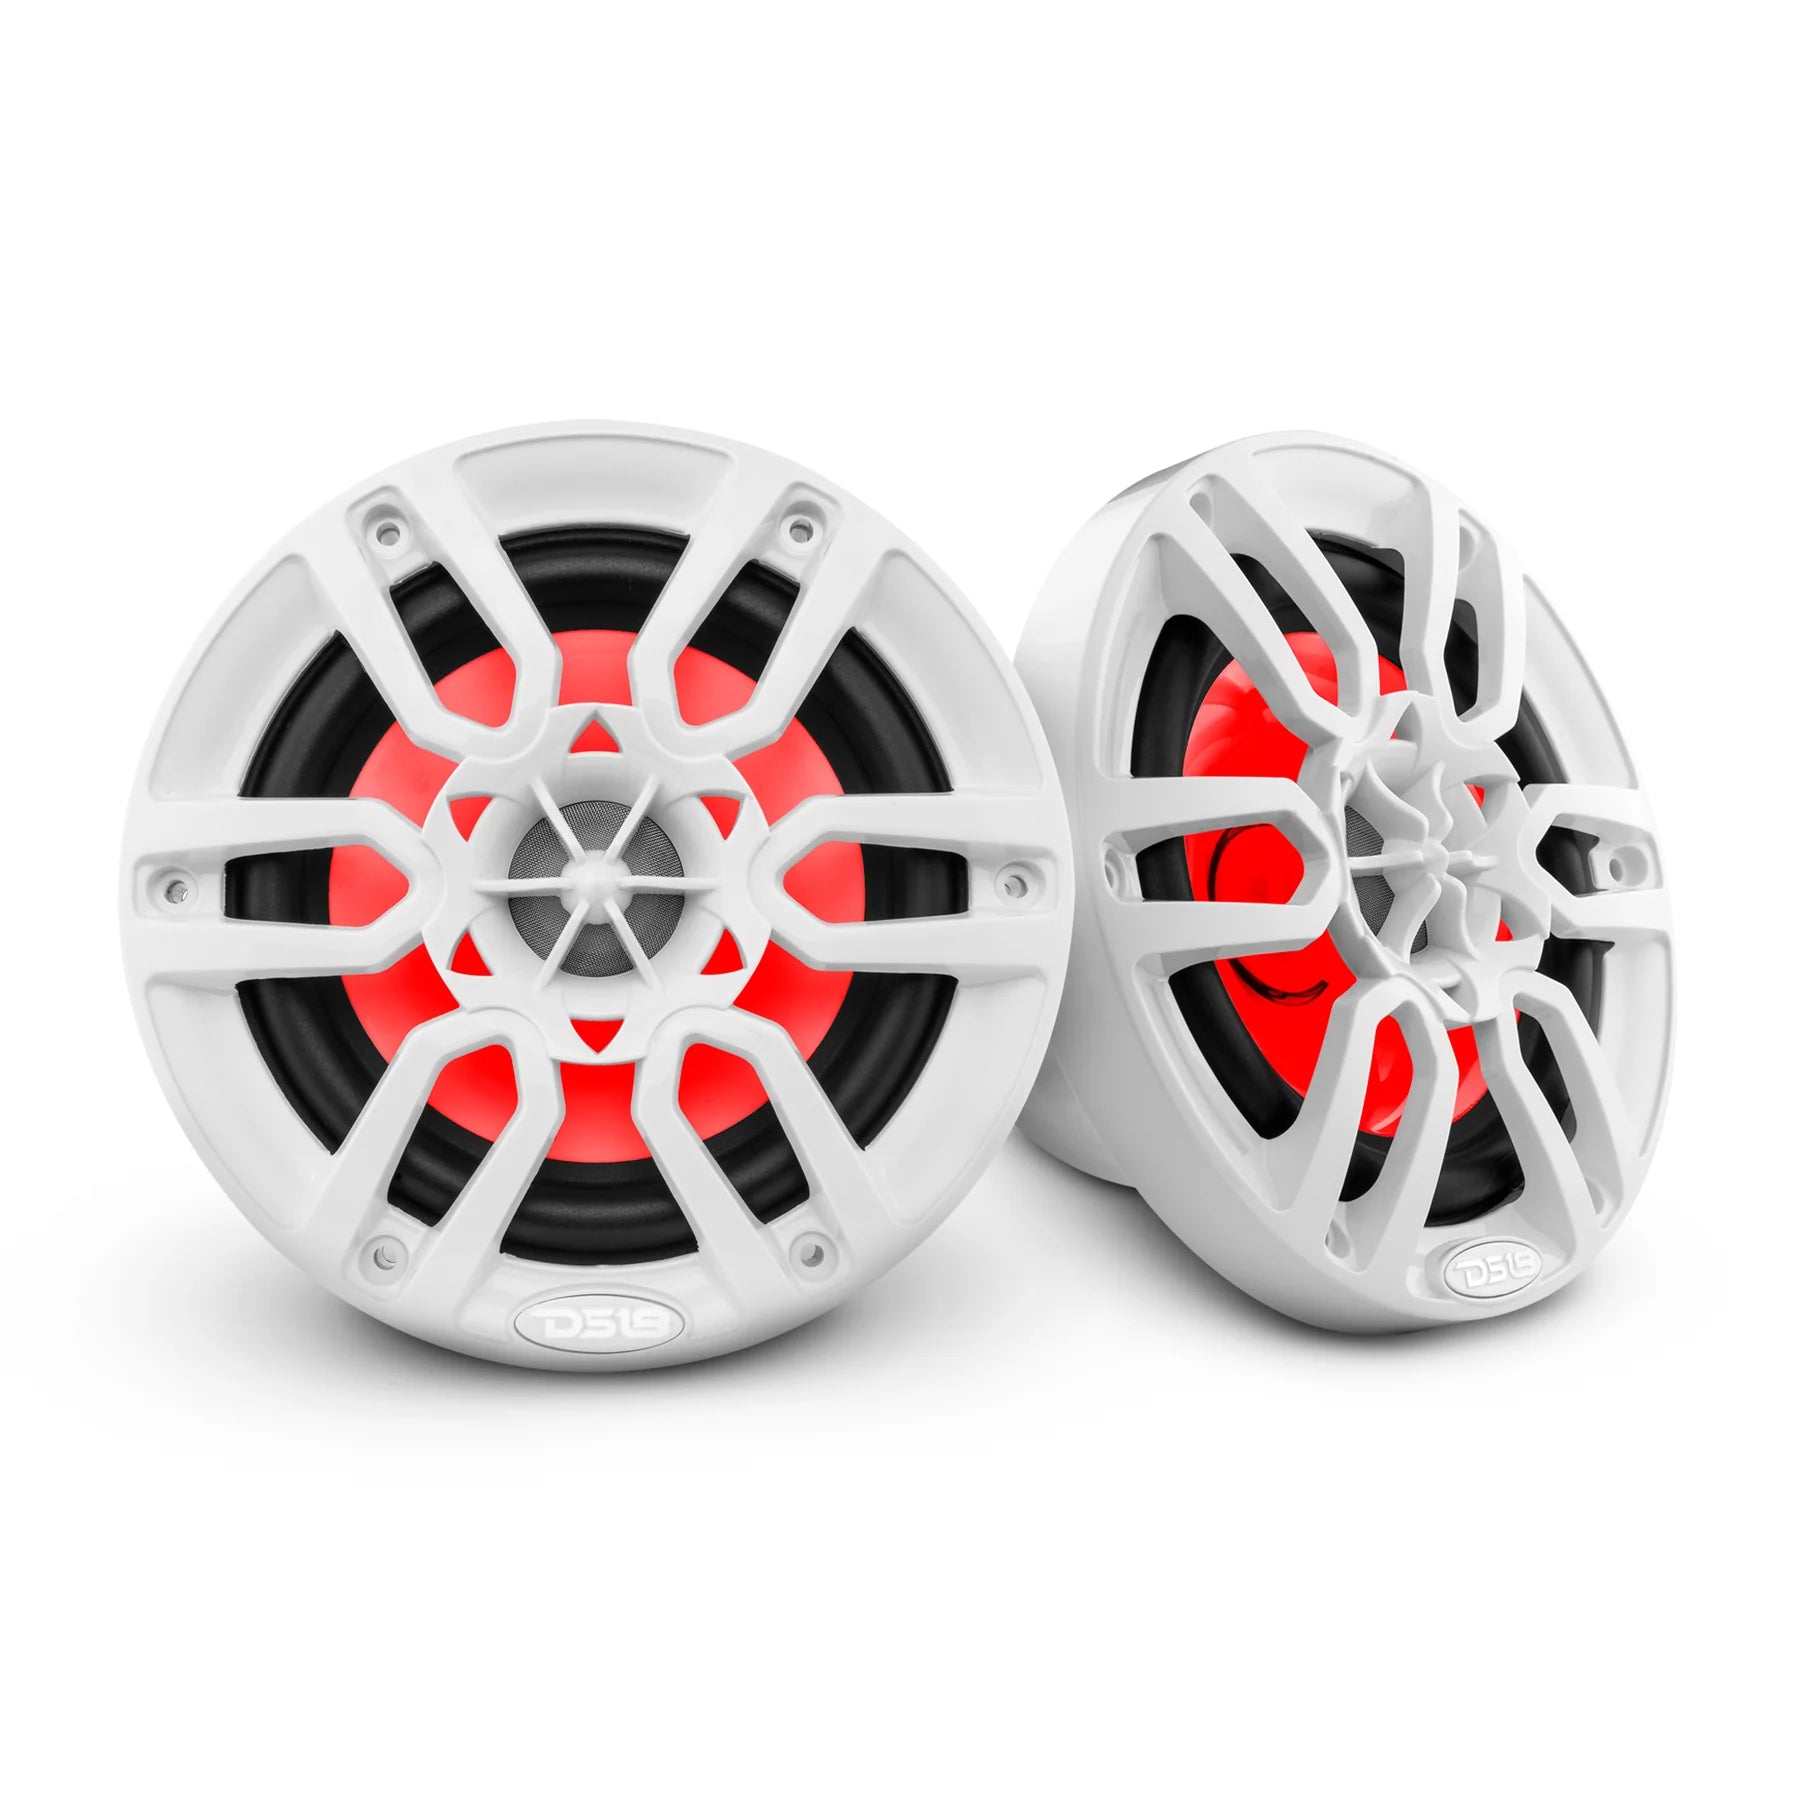 DS18 NXL-6/WH 6.5" 2-Way Coaxial Marine Speaker w/ LED RGB Lights 100 Watts 4-Ohm - White (Pair)